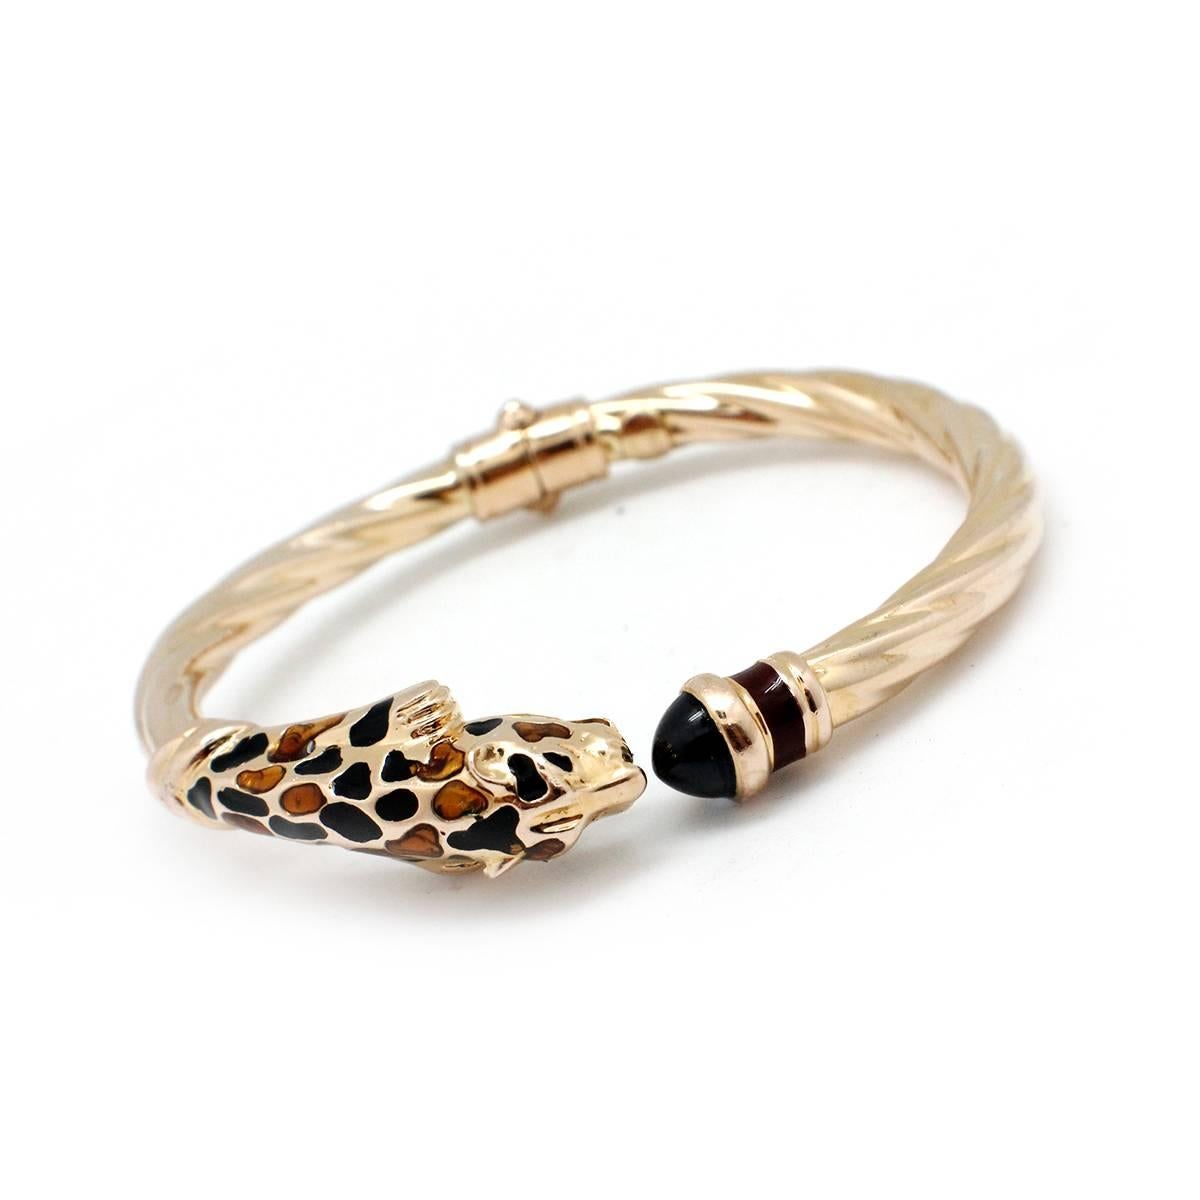 This  exotic and beautiful panther bracelet is one of Faro’s  artistic genius designs.  This is a piece to be worn by itself as a whisper of exoticness or to layer with others to capture its mystique.  Crafted in enamel,  and 14k yellow gold, a